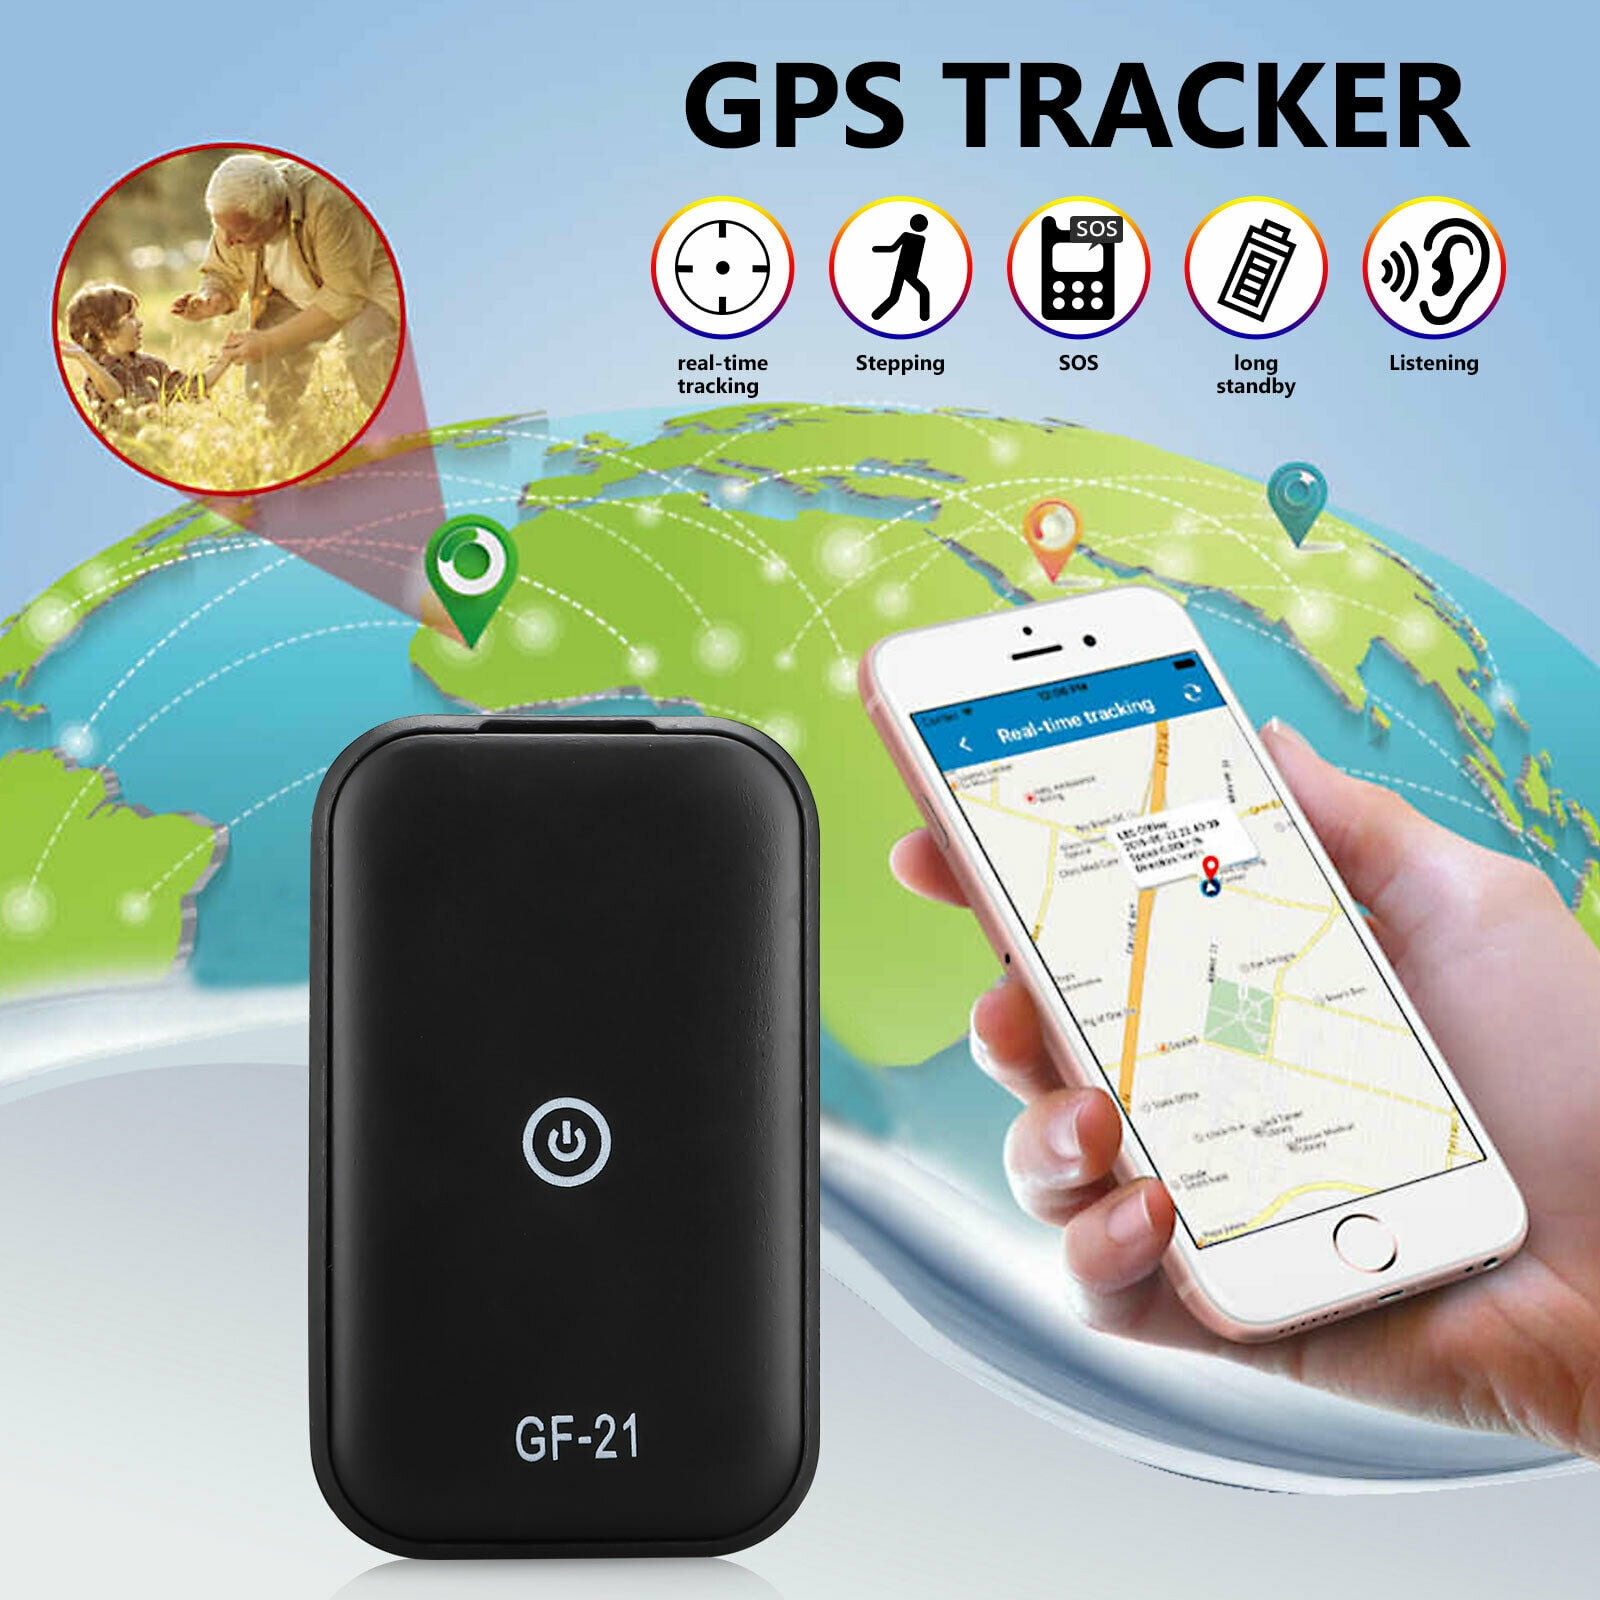 Tracker for Car, Truck, RV, Equipment, Tracking Device for Kids and Seniors, Use with Smartphone and Track Target's Real-Time Location - Walmart.com